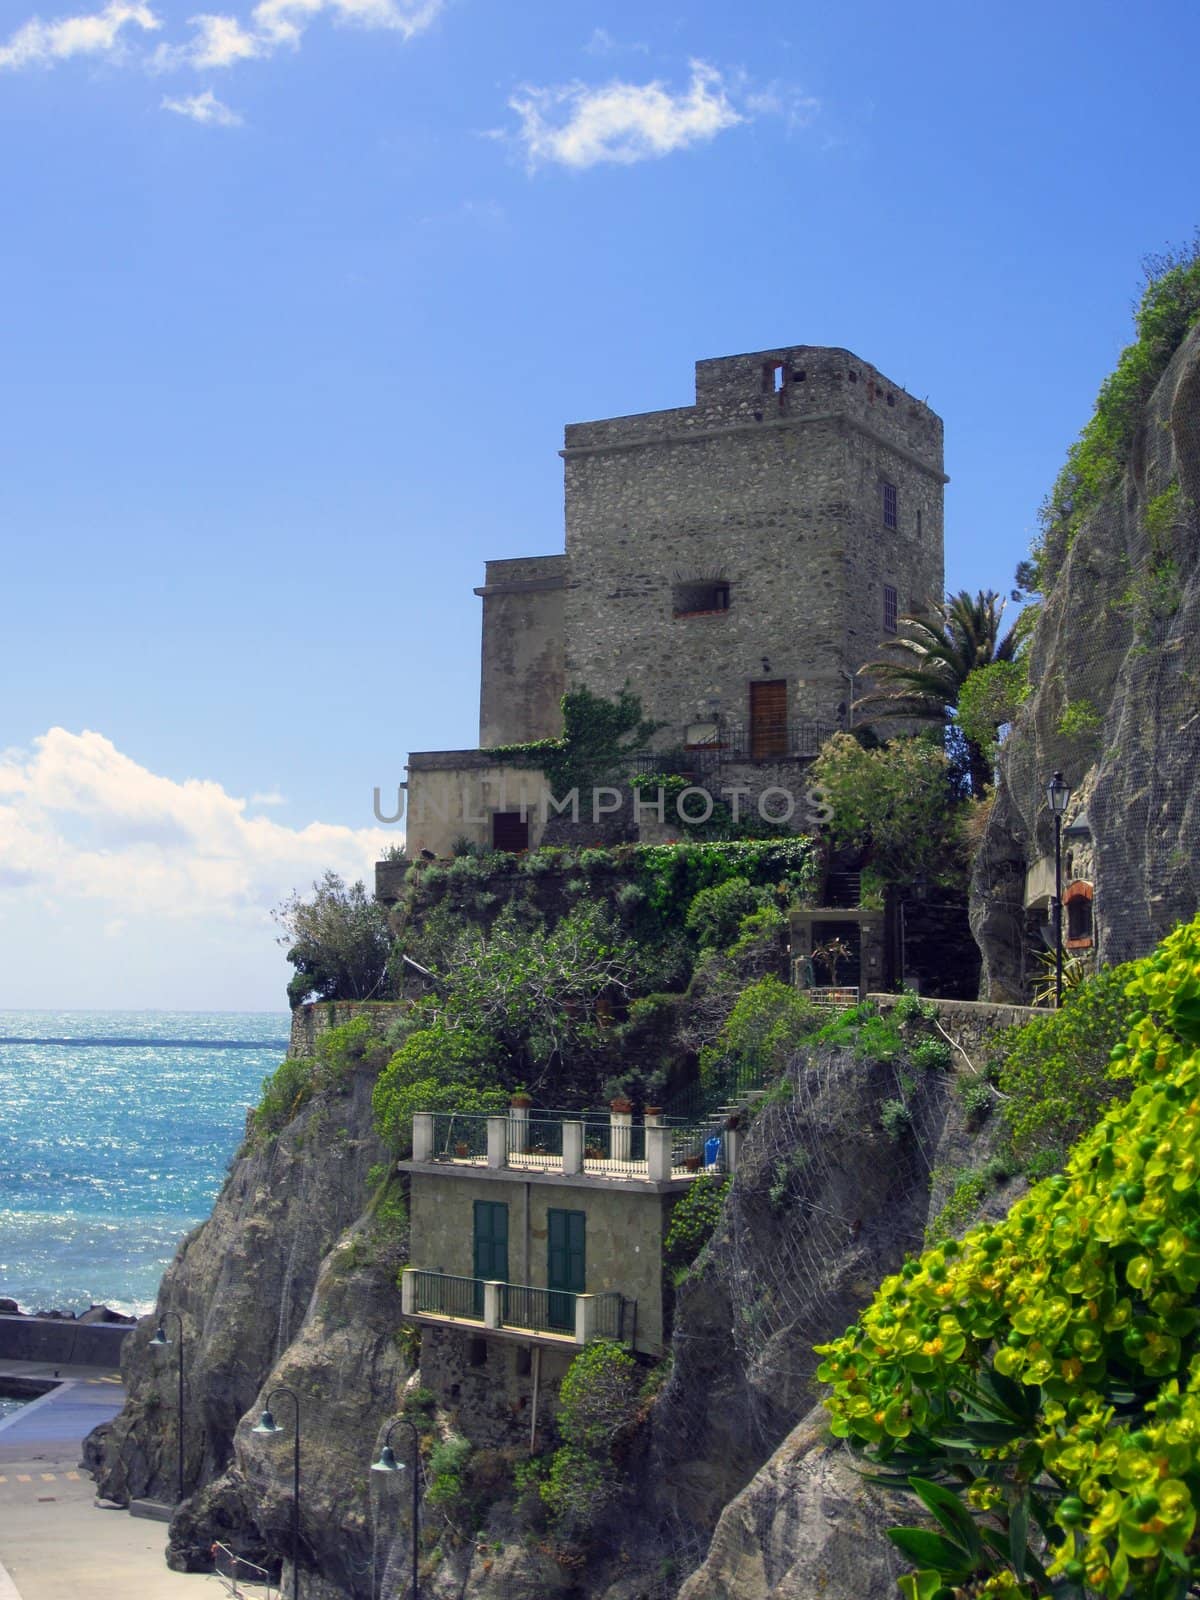 Monterosso, Italy by jol66